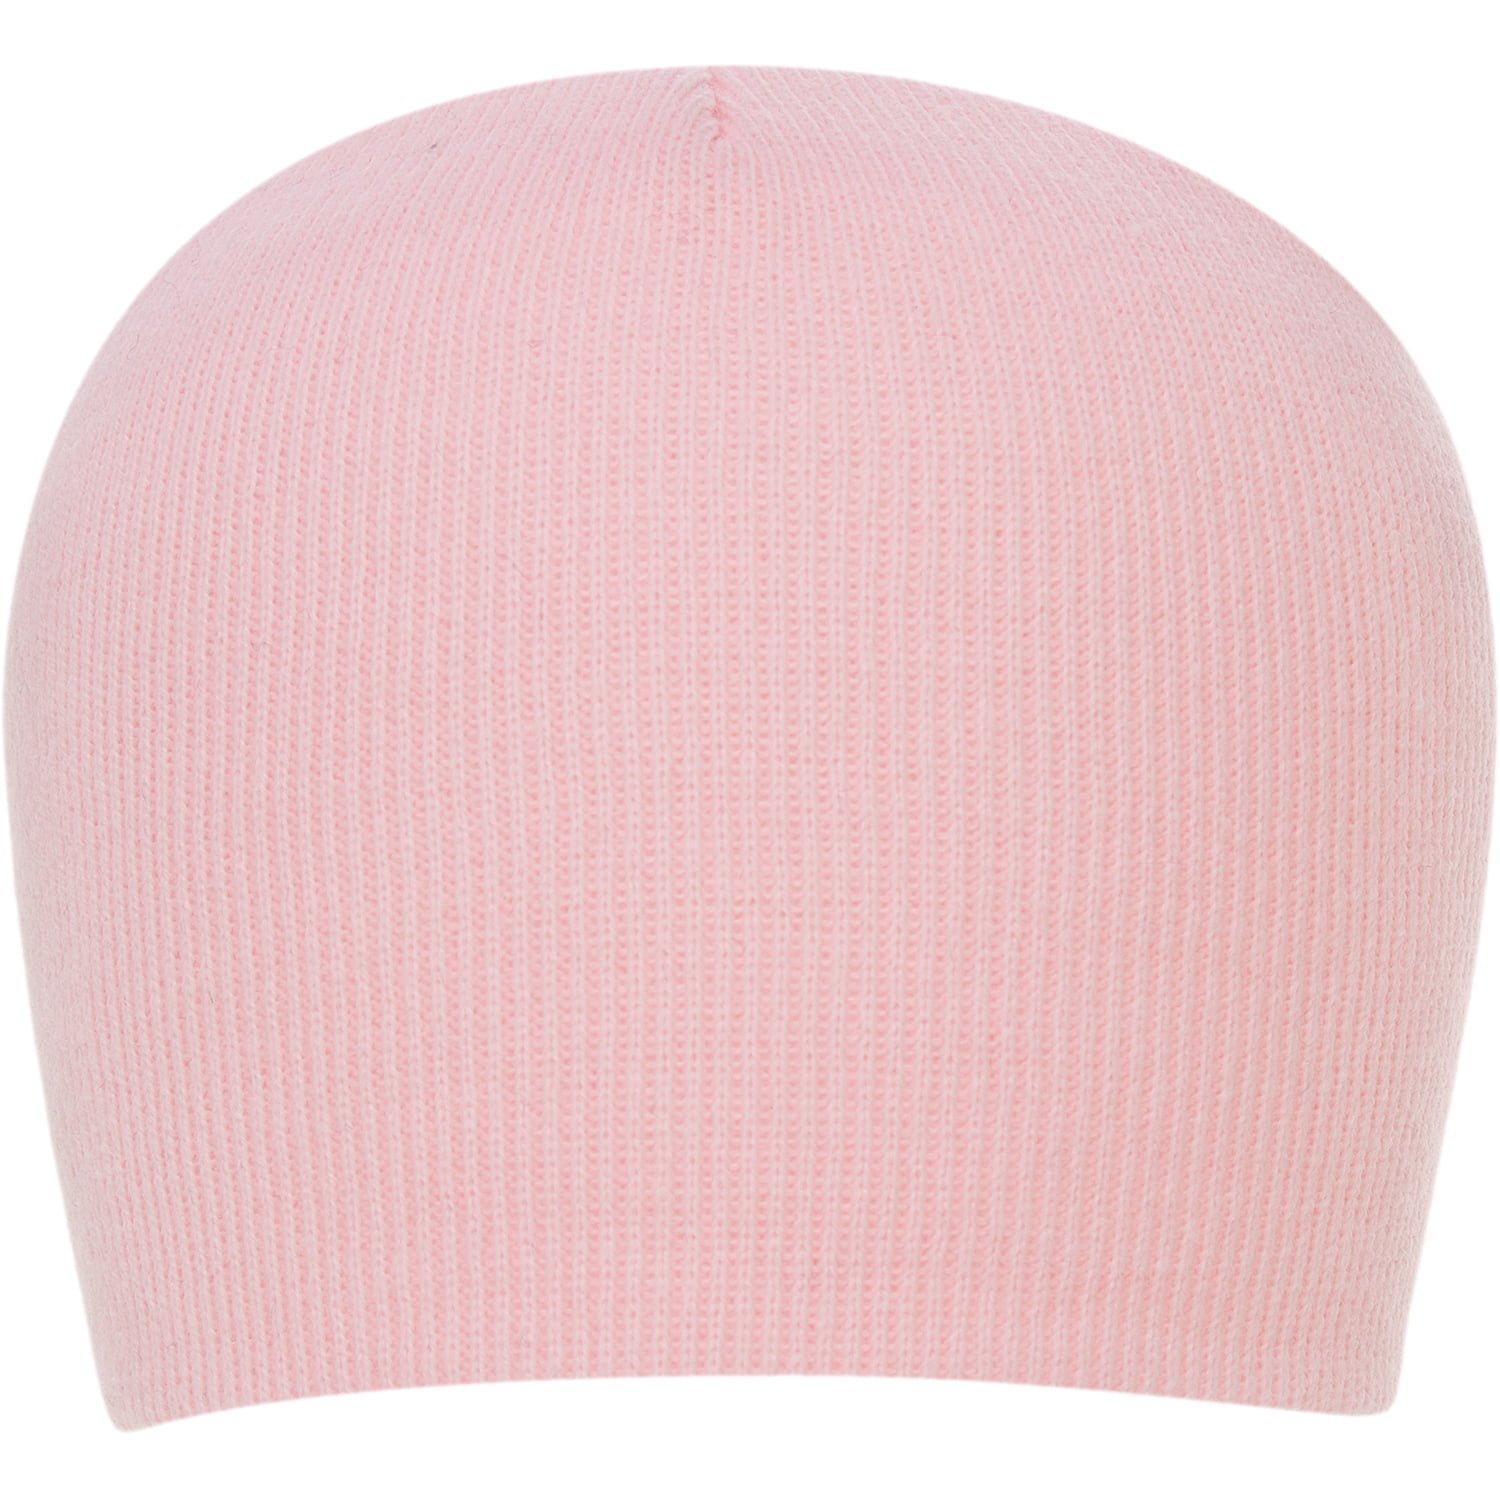 Solid Color Beanie Winter Hat